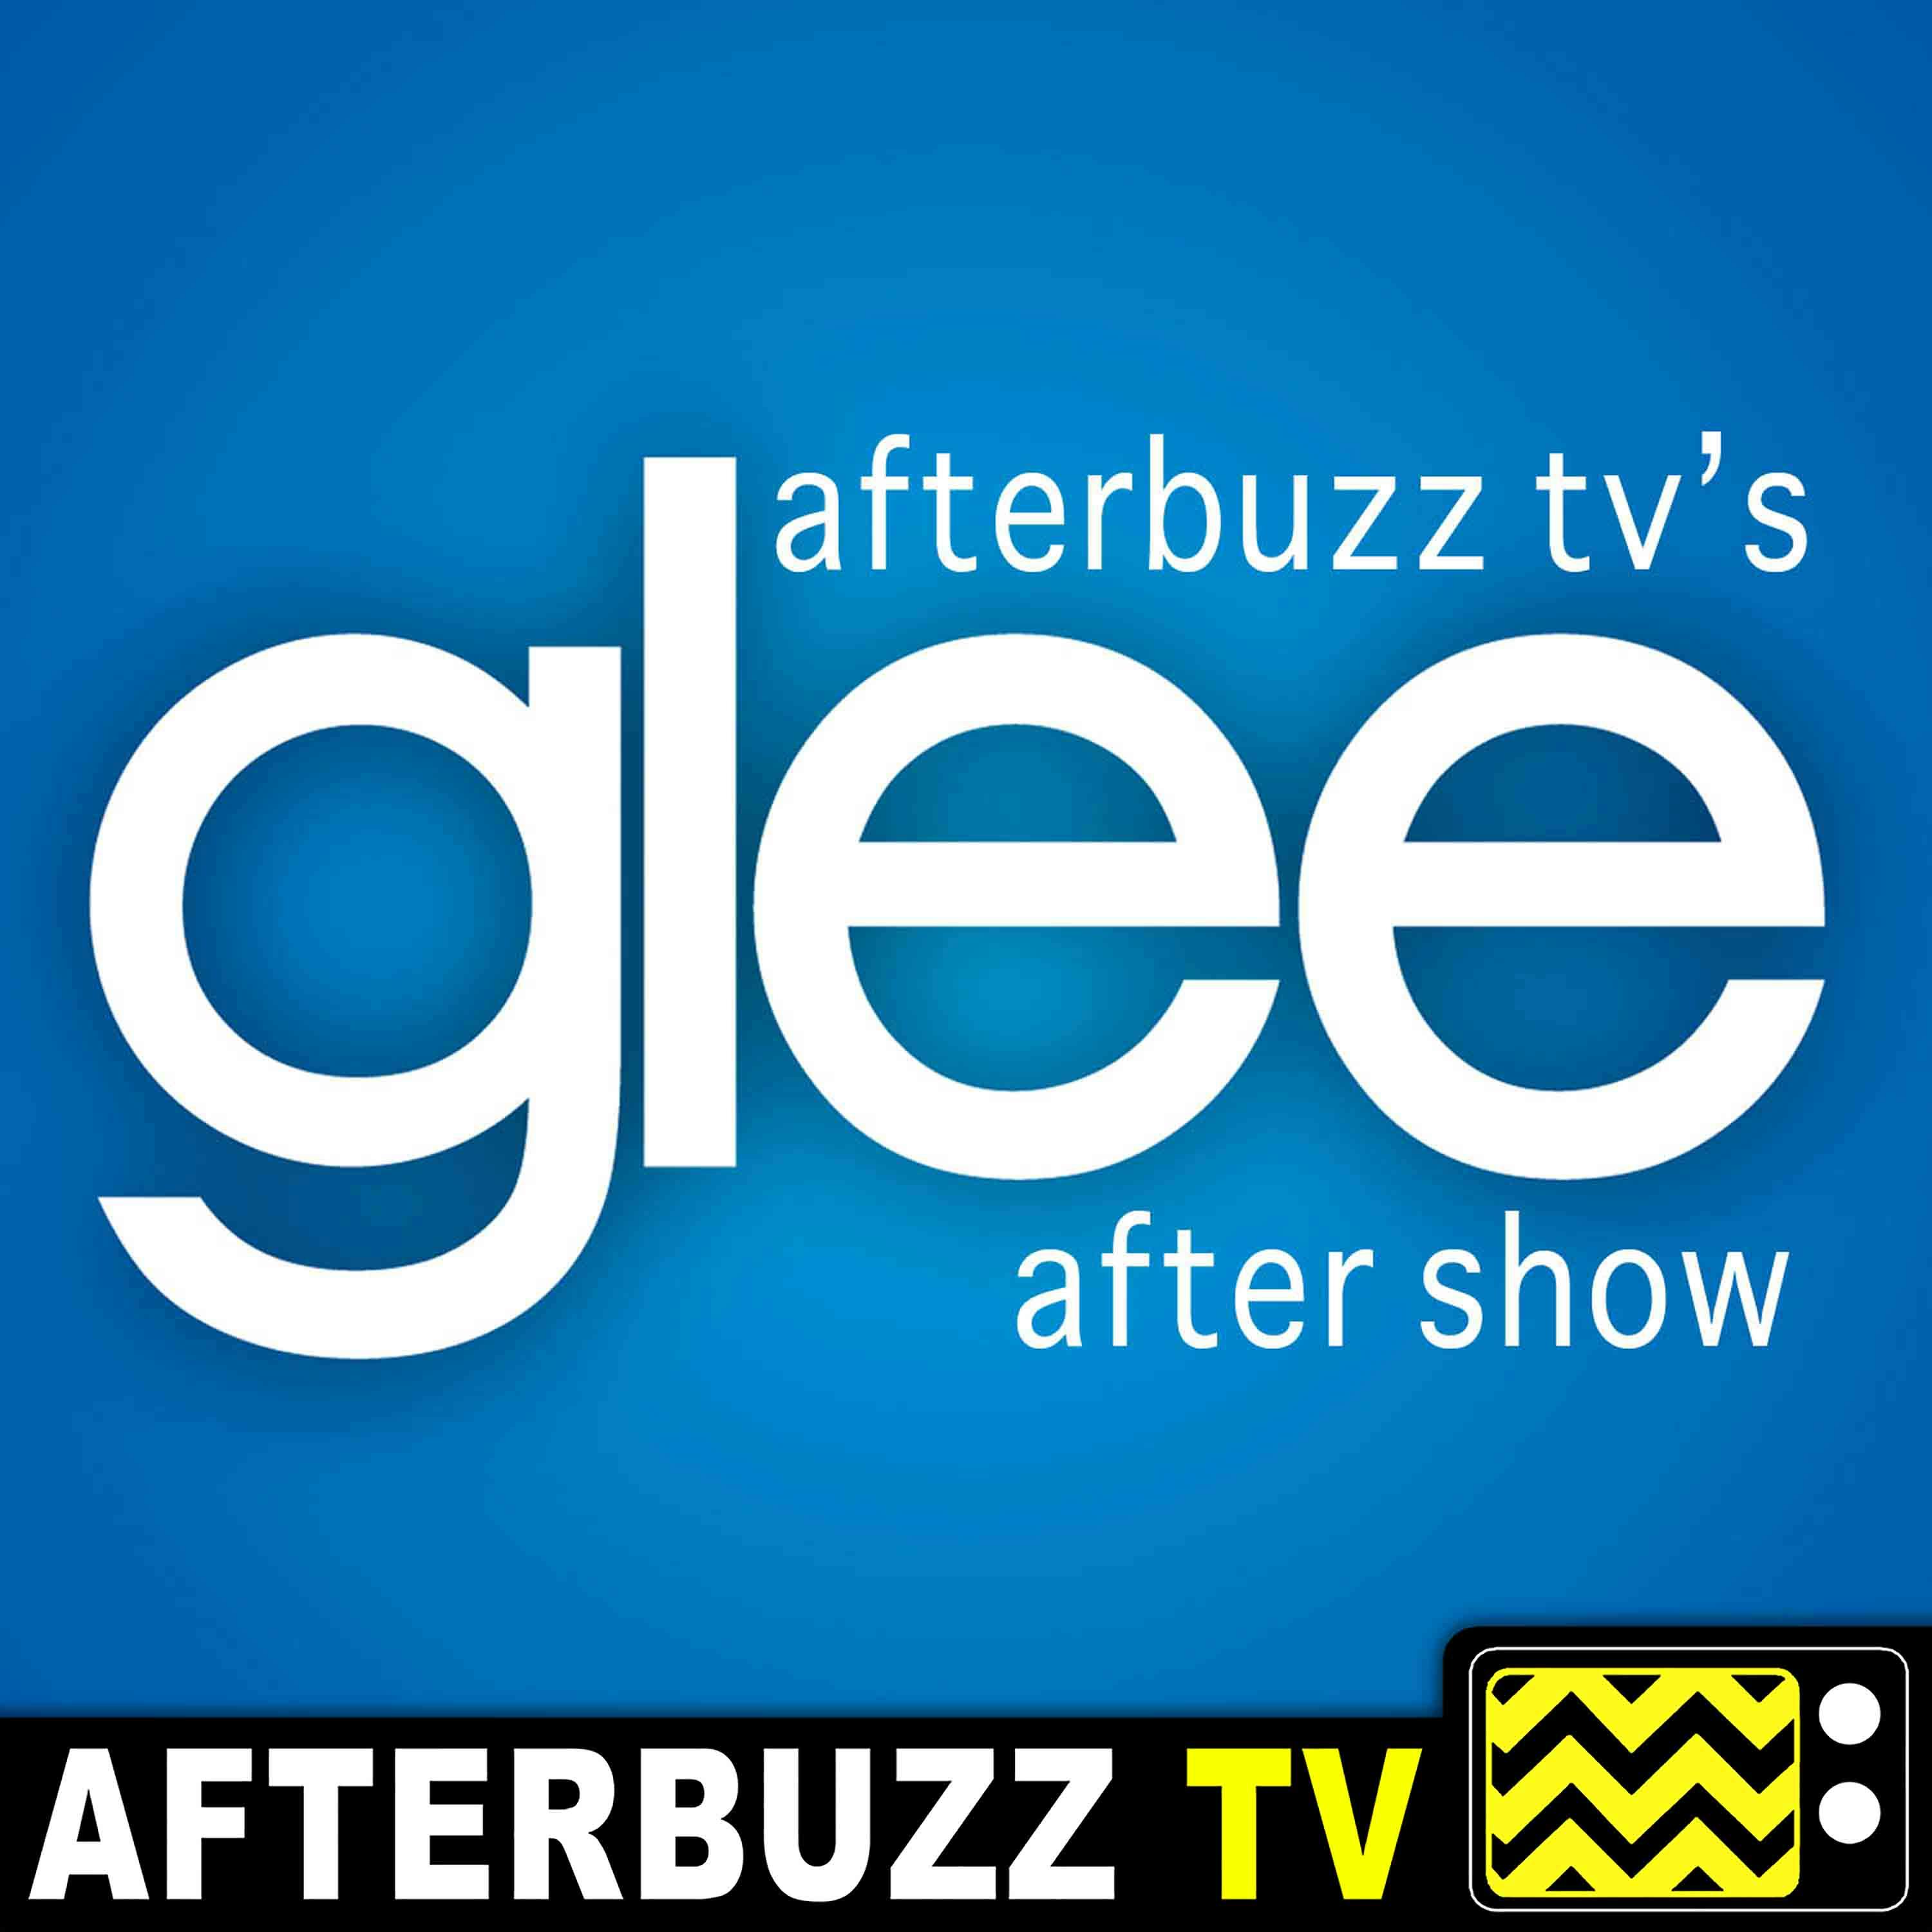 Glee S:5 | 100 E:12 | AfterBuzz TV AfterShow